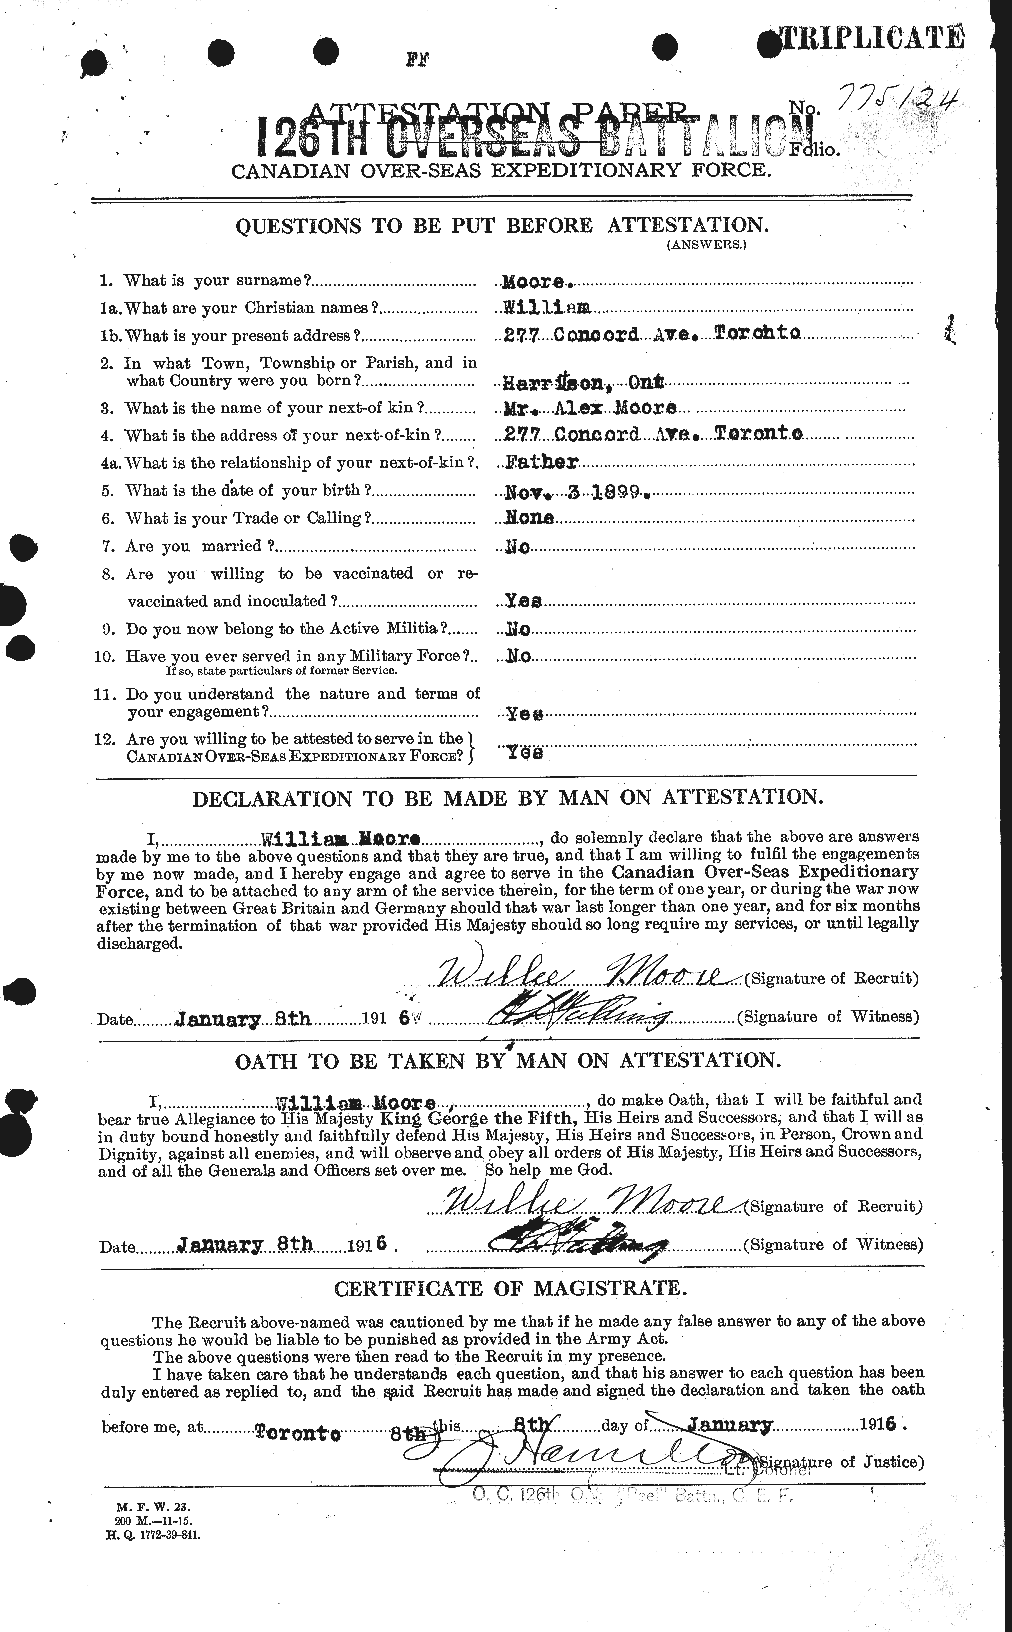 Personnel Records of the First World War - CEF 505758a